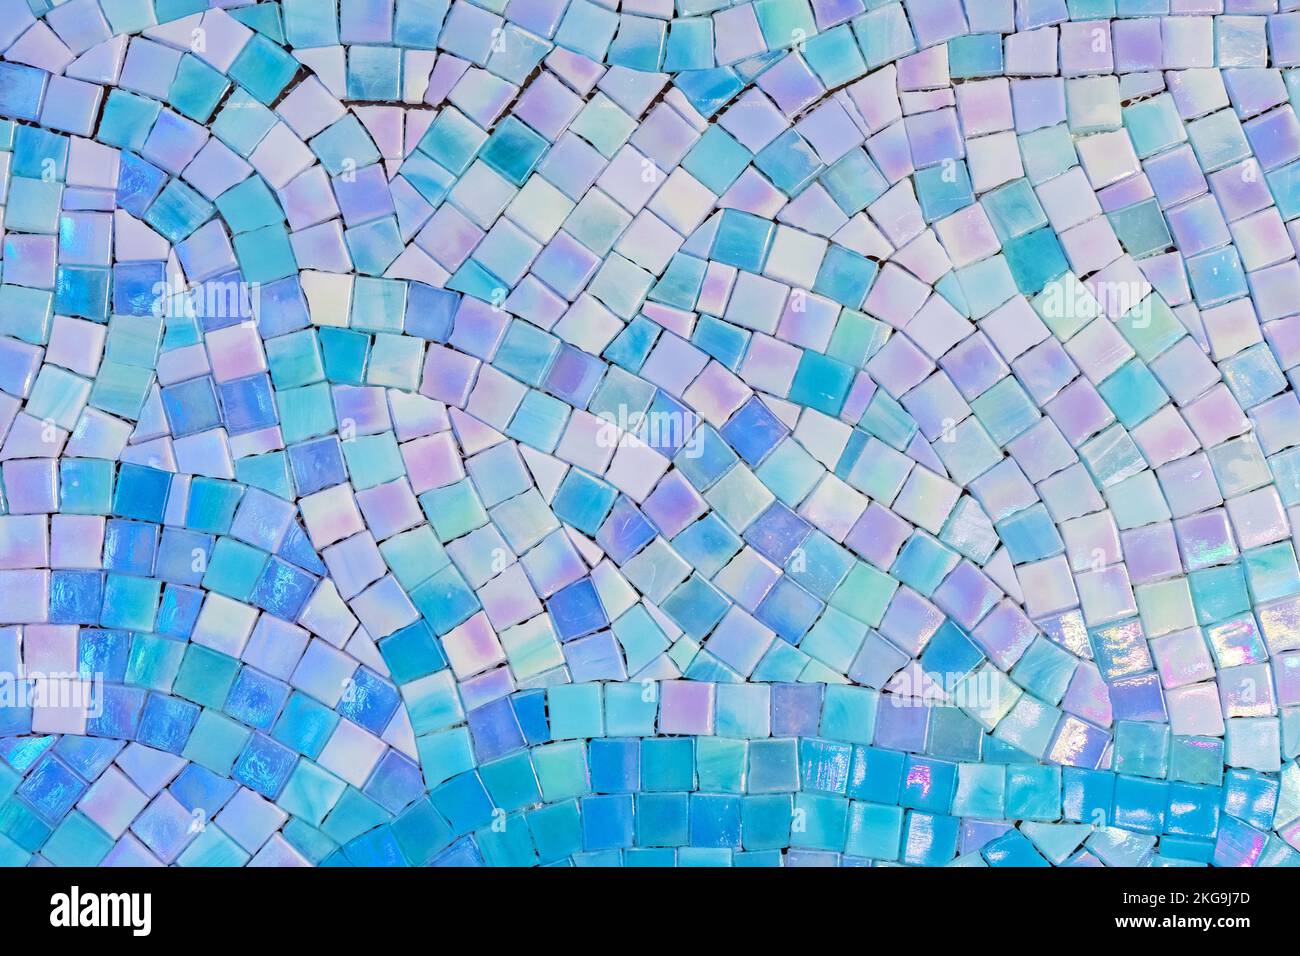 Ceramic mosaic tiles with white, blue and turquoise squares laid out in a chaotic pattern. Stock Photo